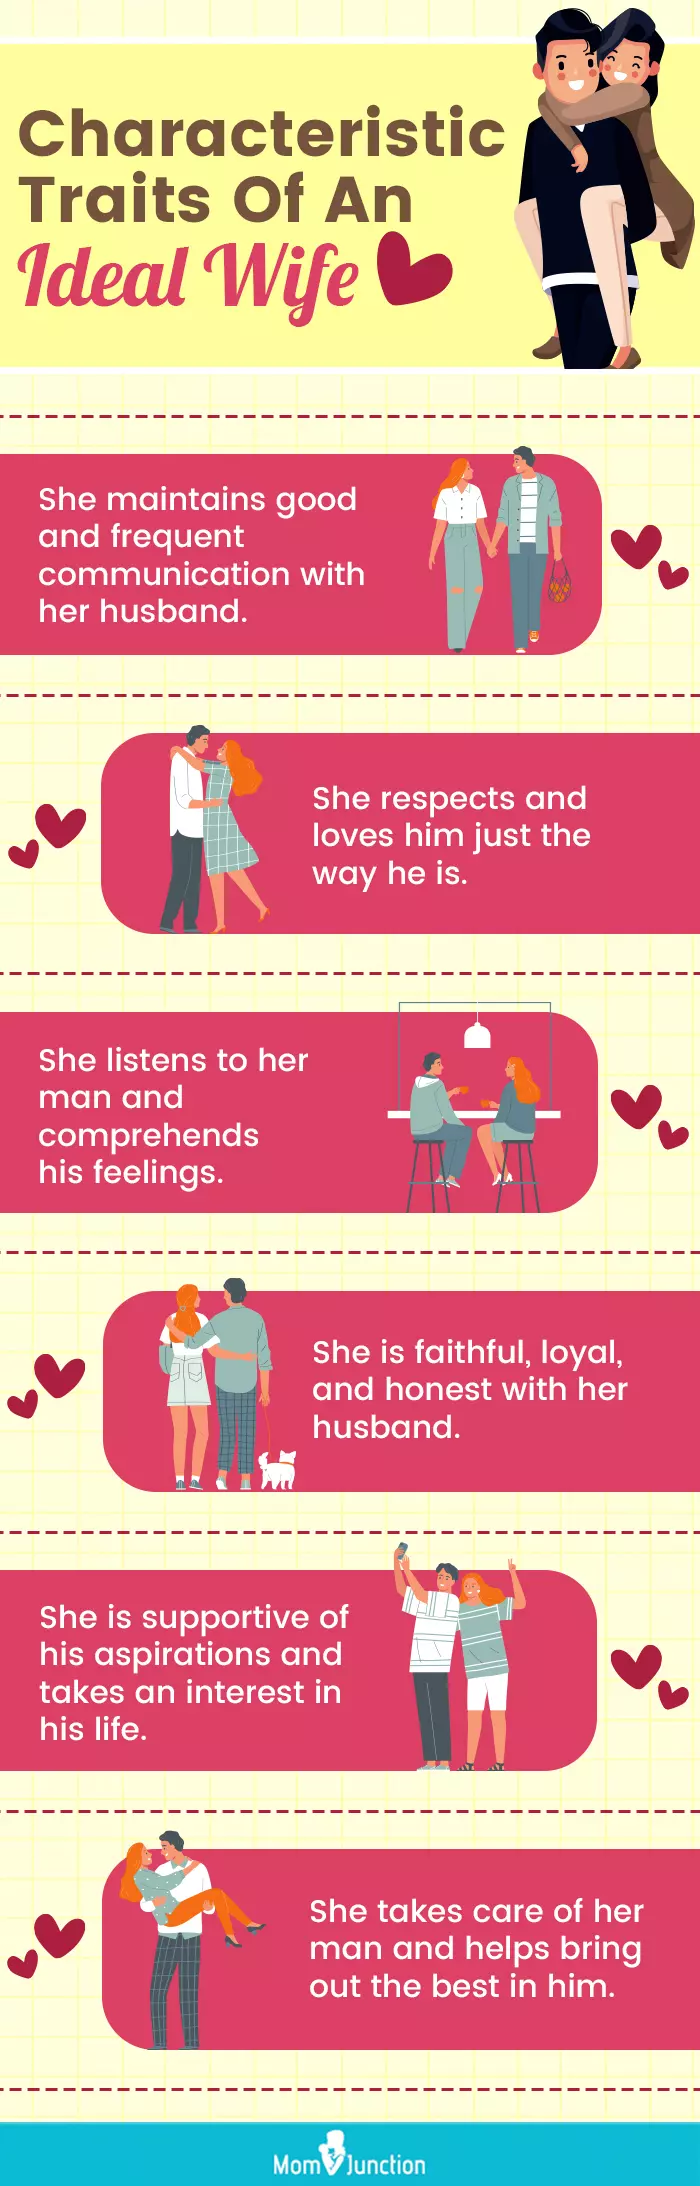 characteristic traits of an ideal wife (infographic)